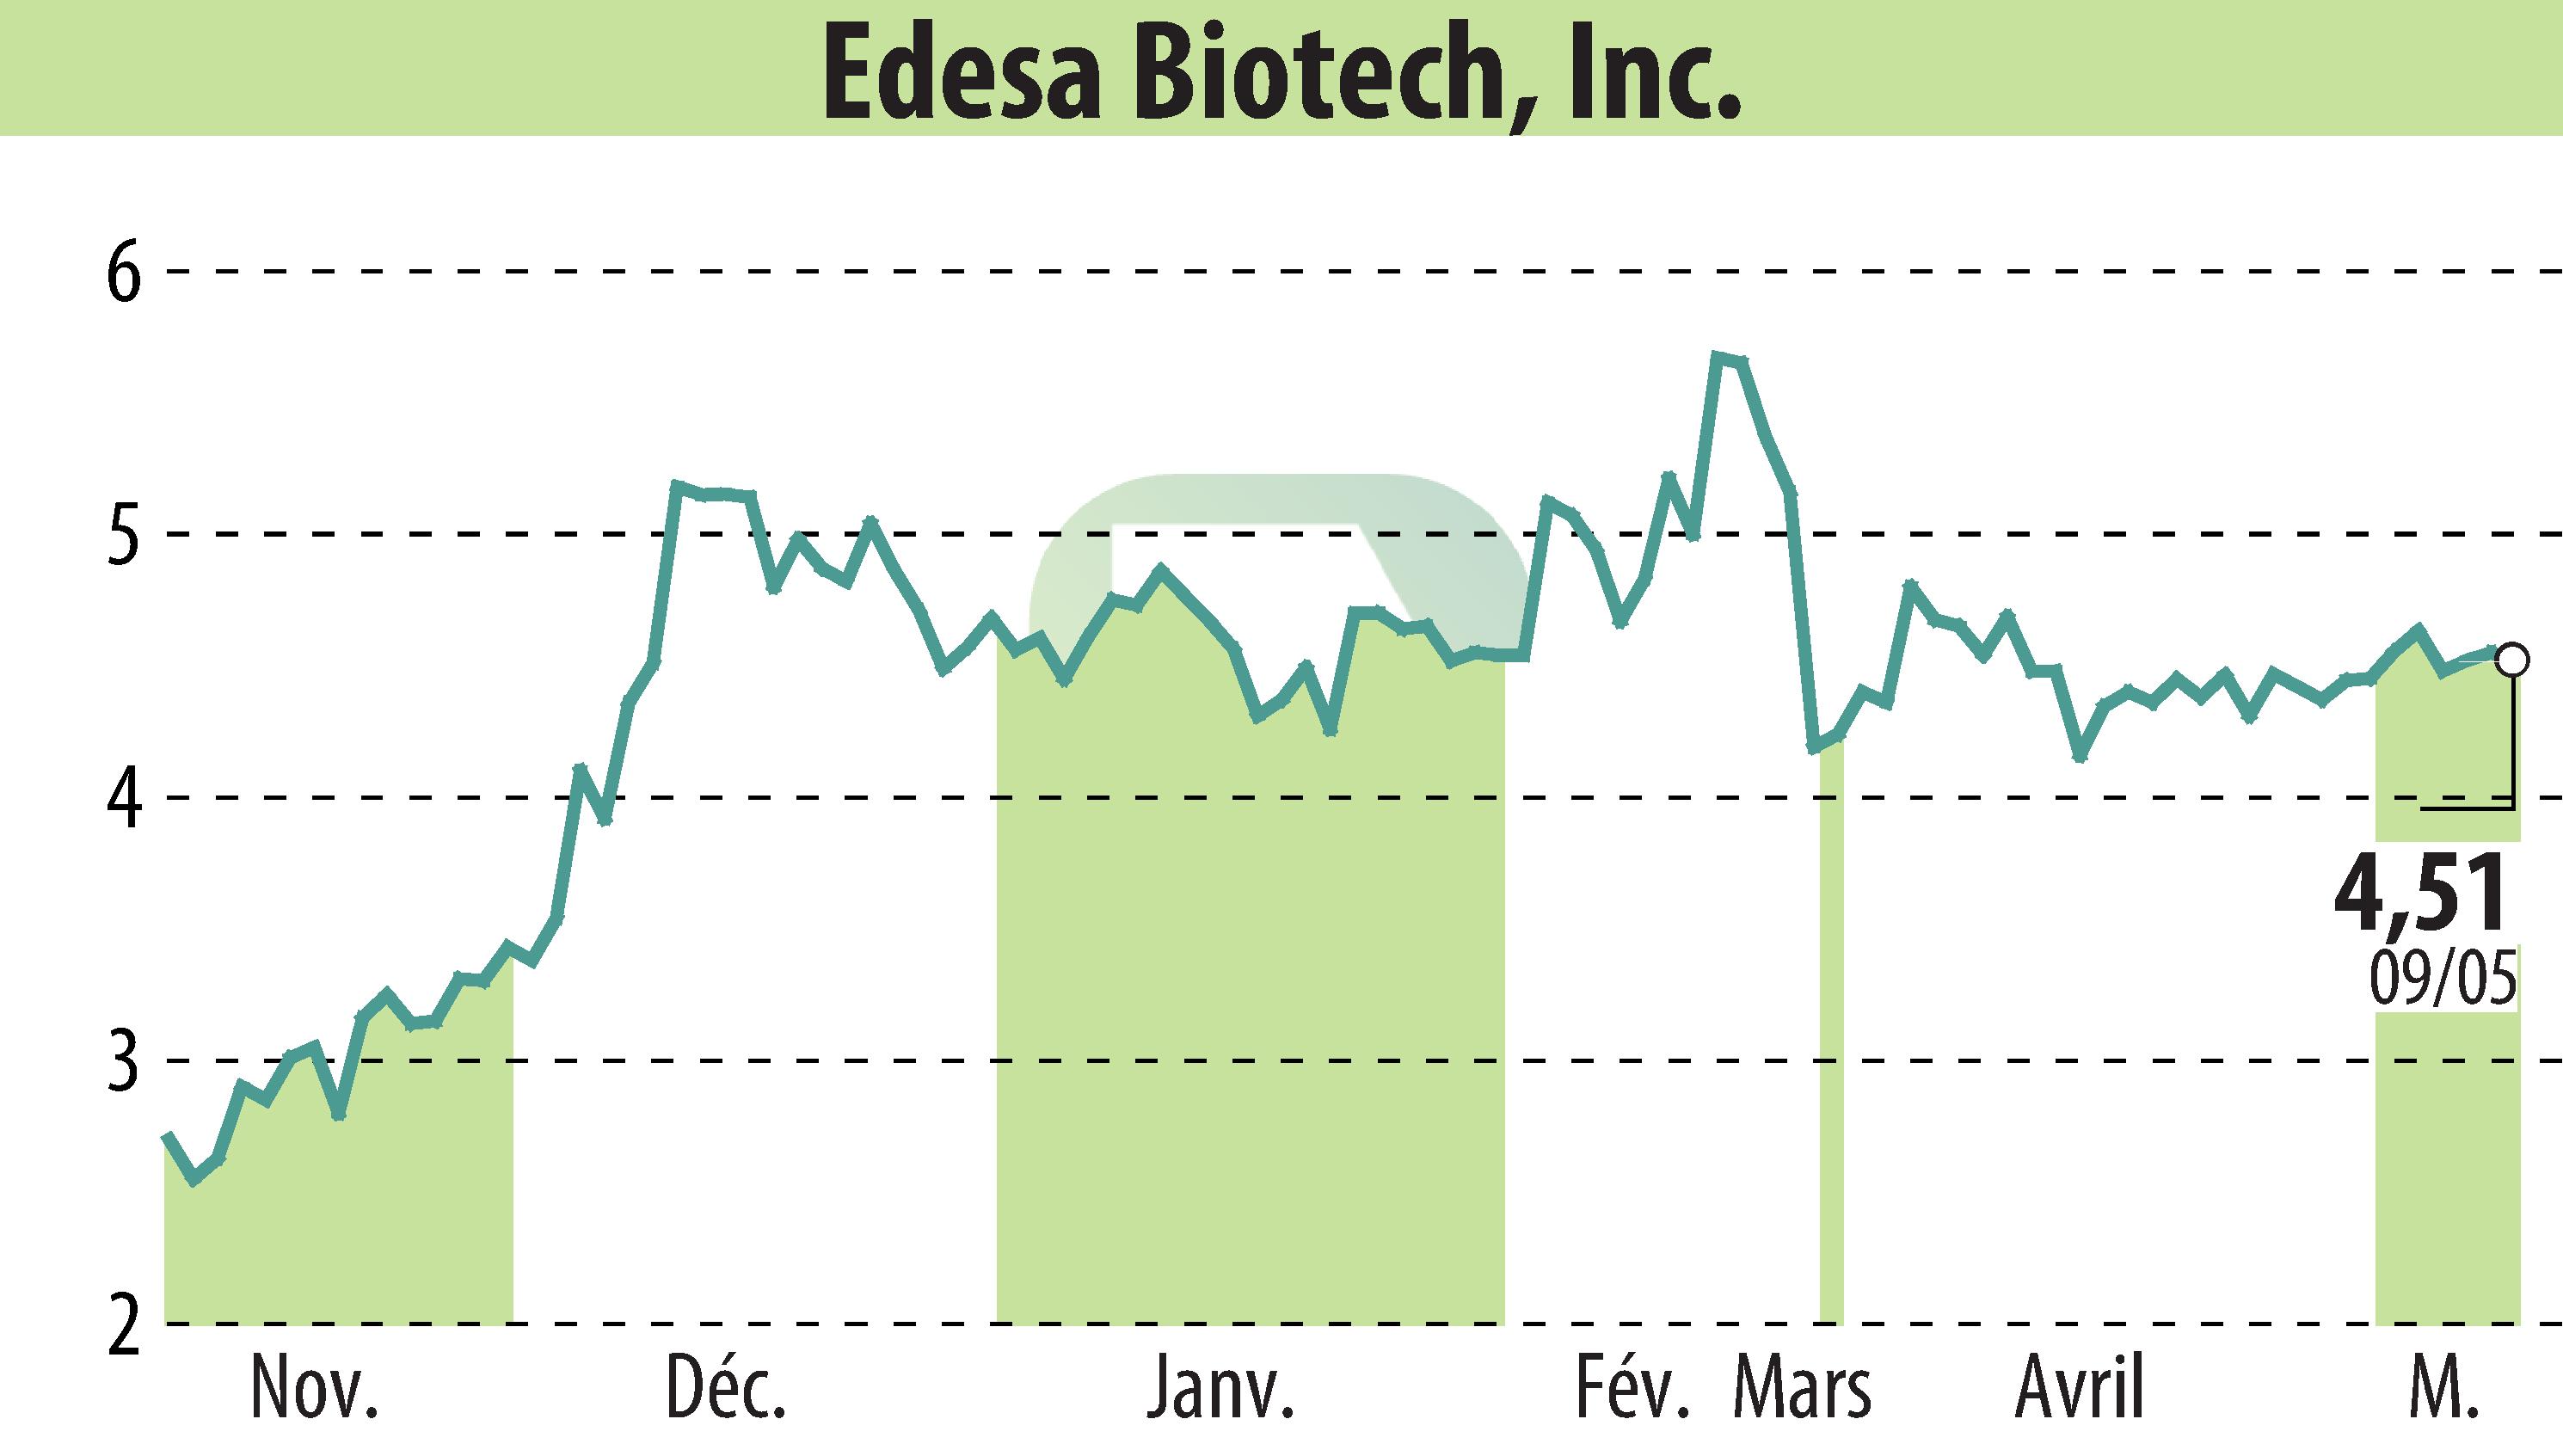 Stock price chart of Edesa Biotech (EBR:EDSA) showing fluctuations.